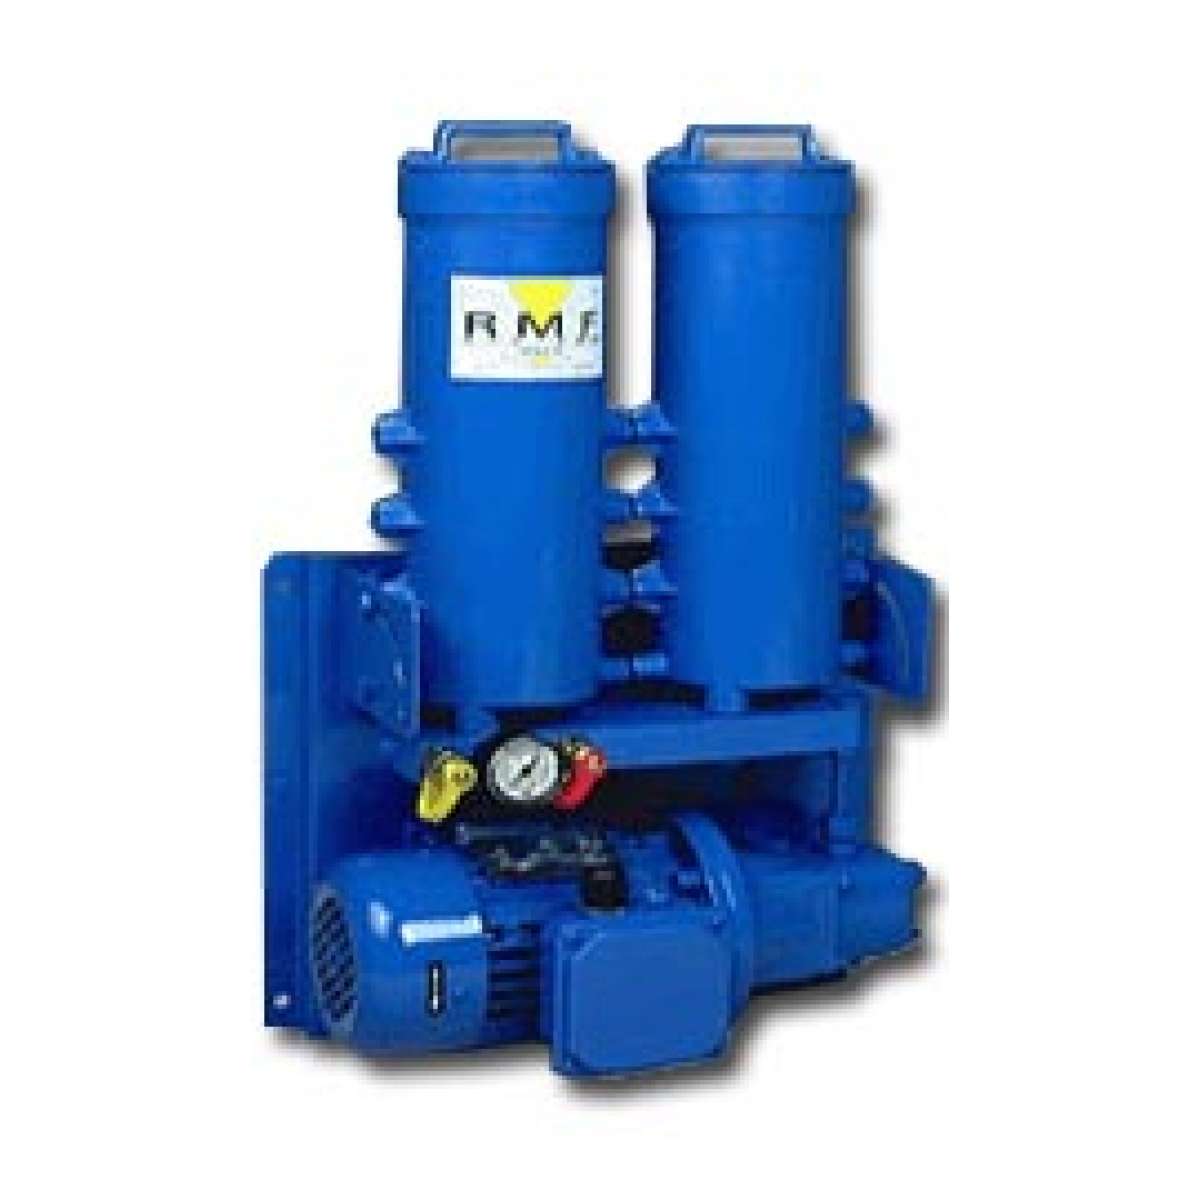 RMF Double Filtration System with Pump/Motor